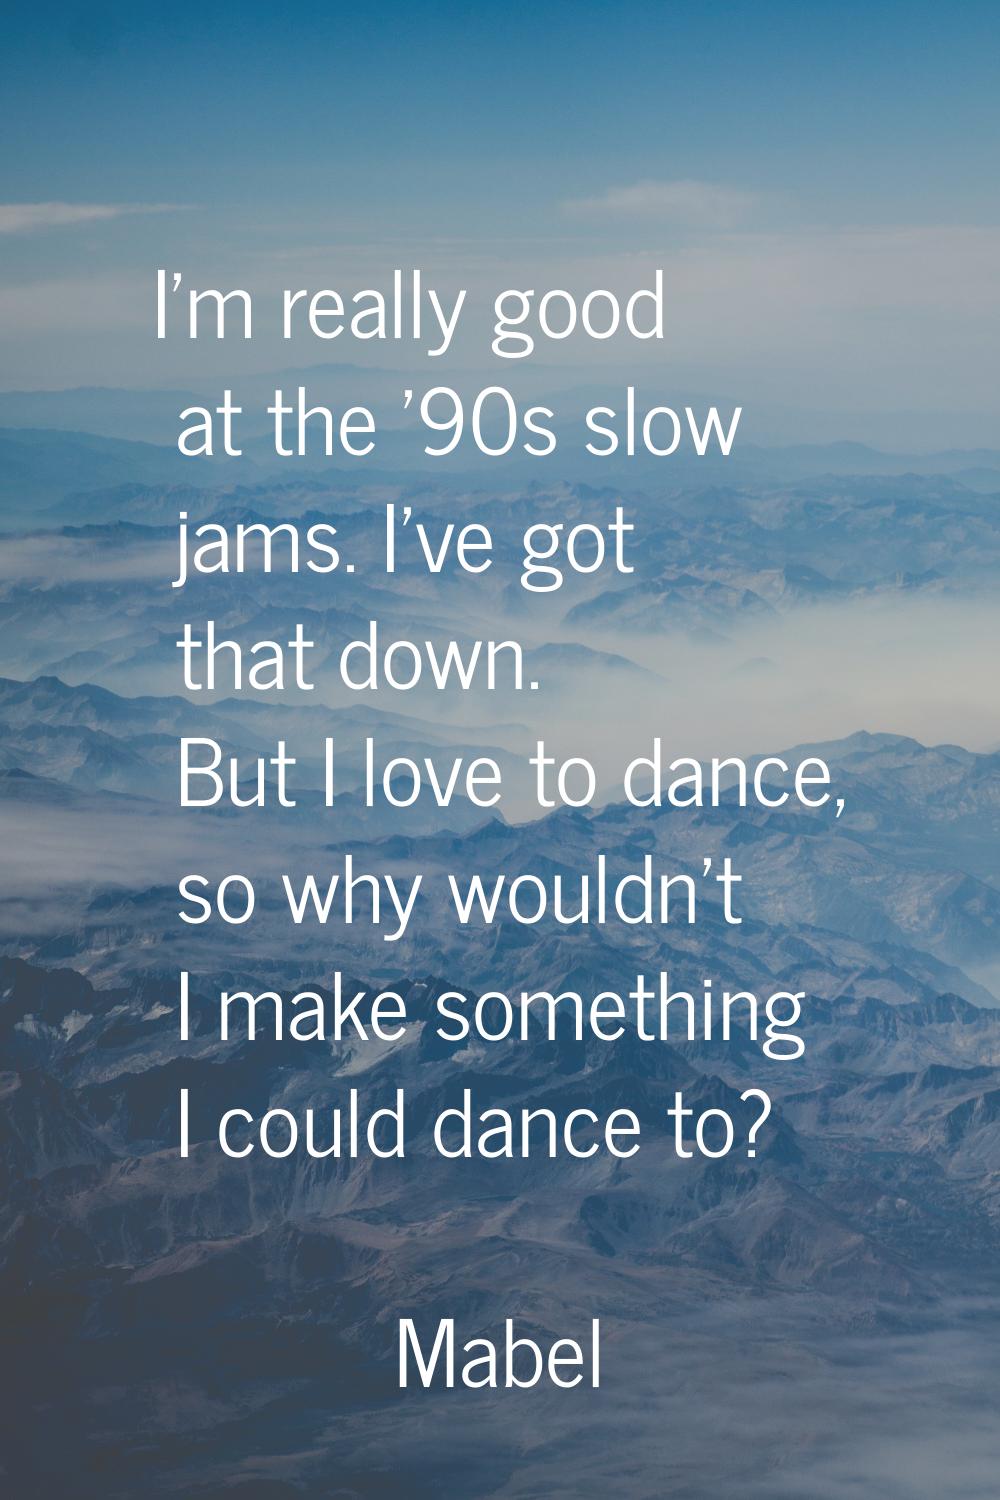 I'm really good at the '90s slow jams. I've got that down. But I love to dance, so why wouldn't I m